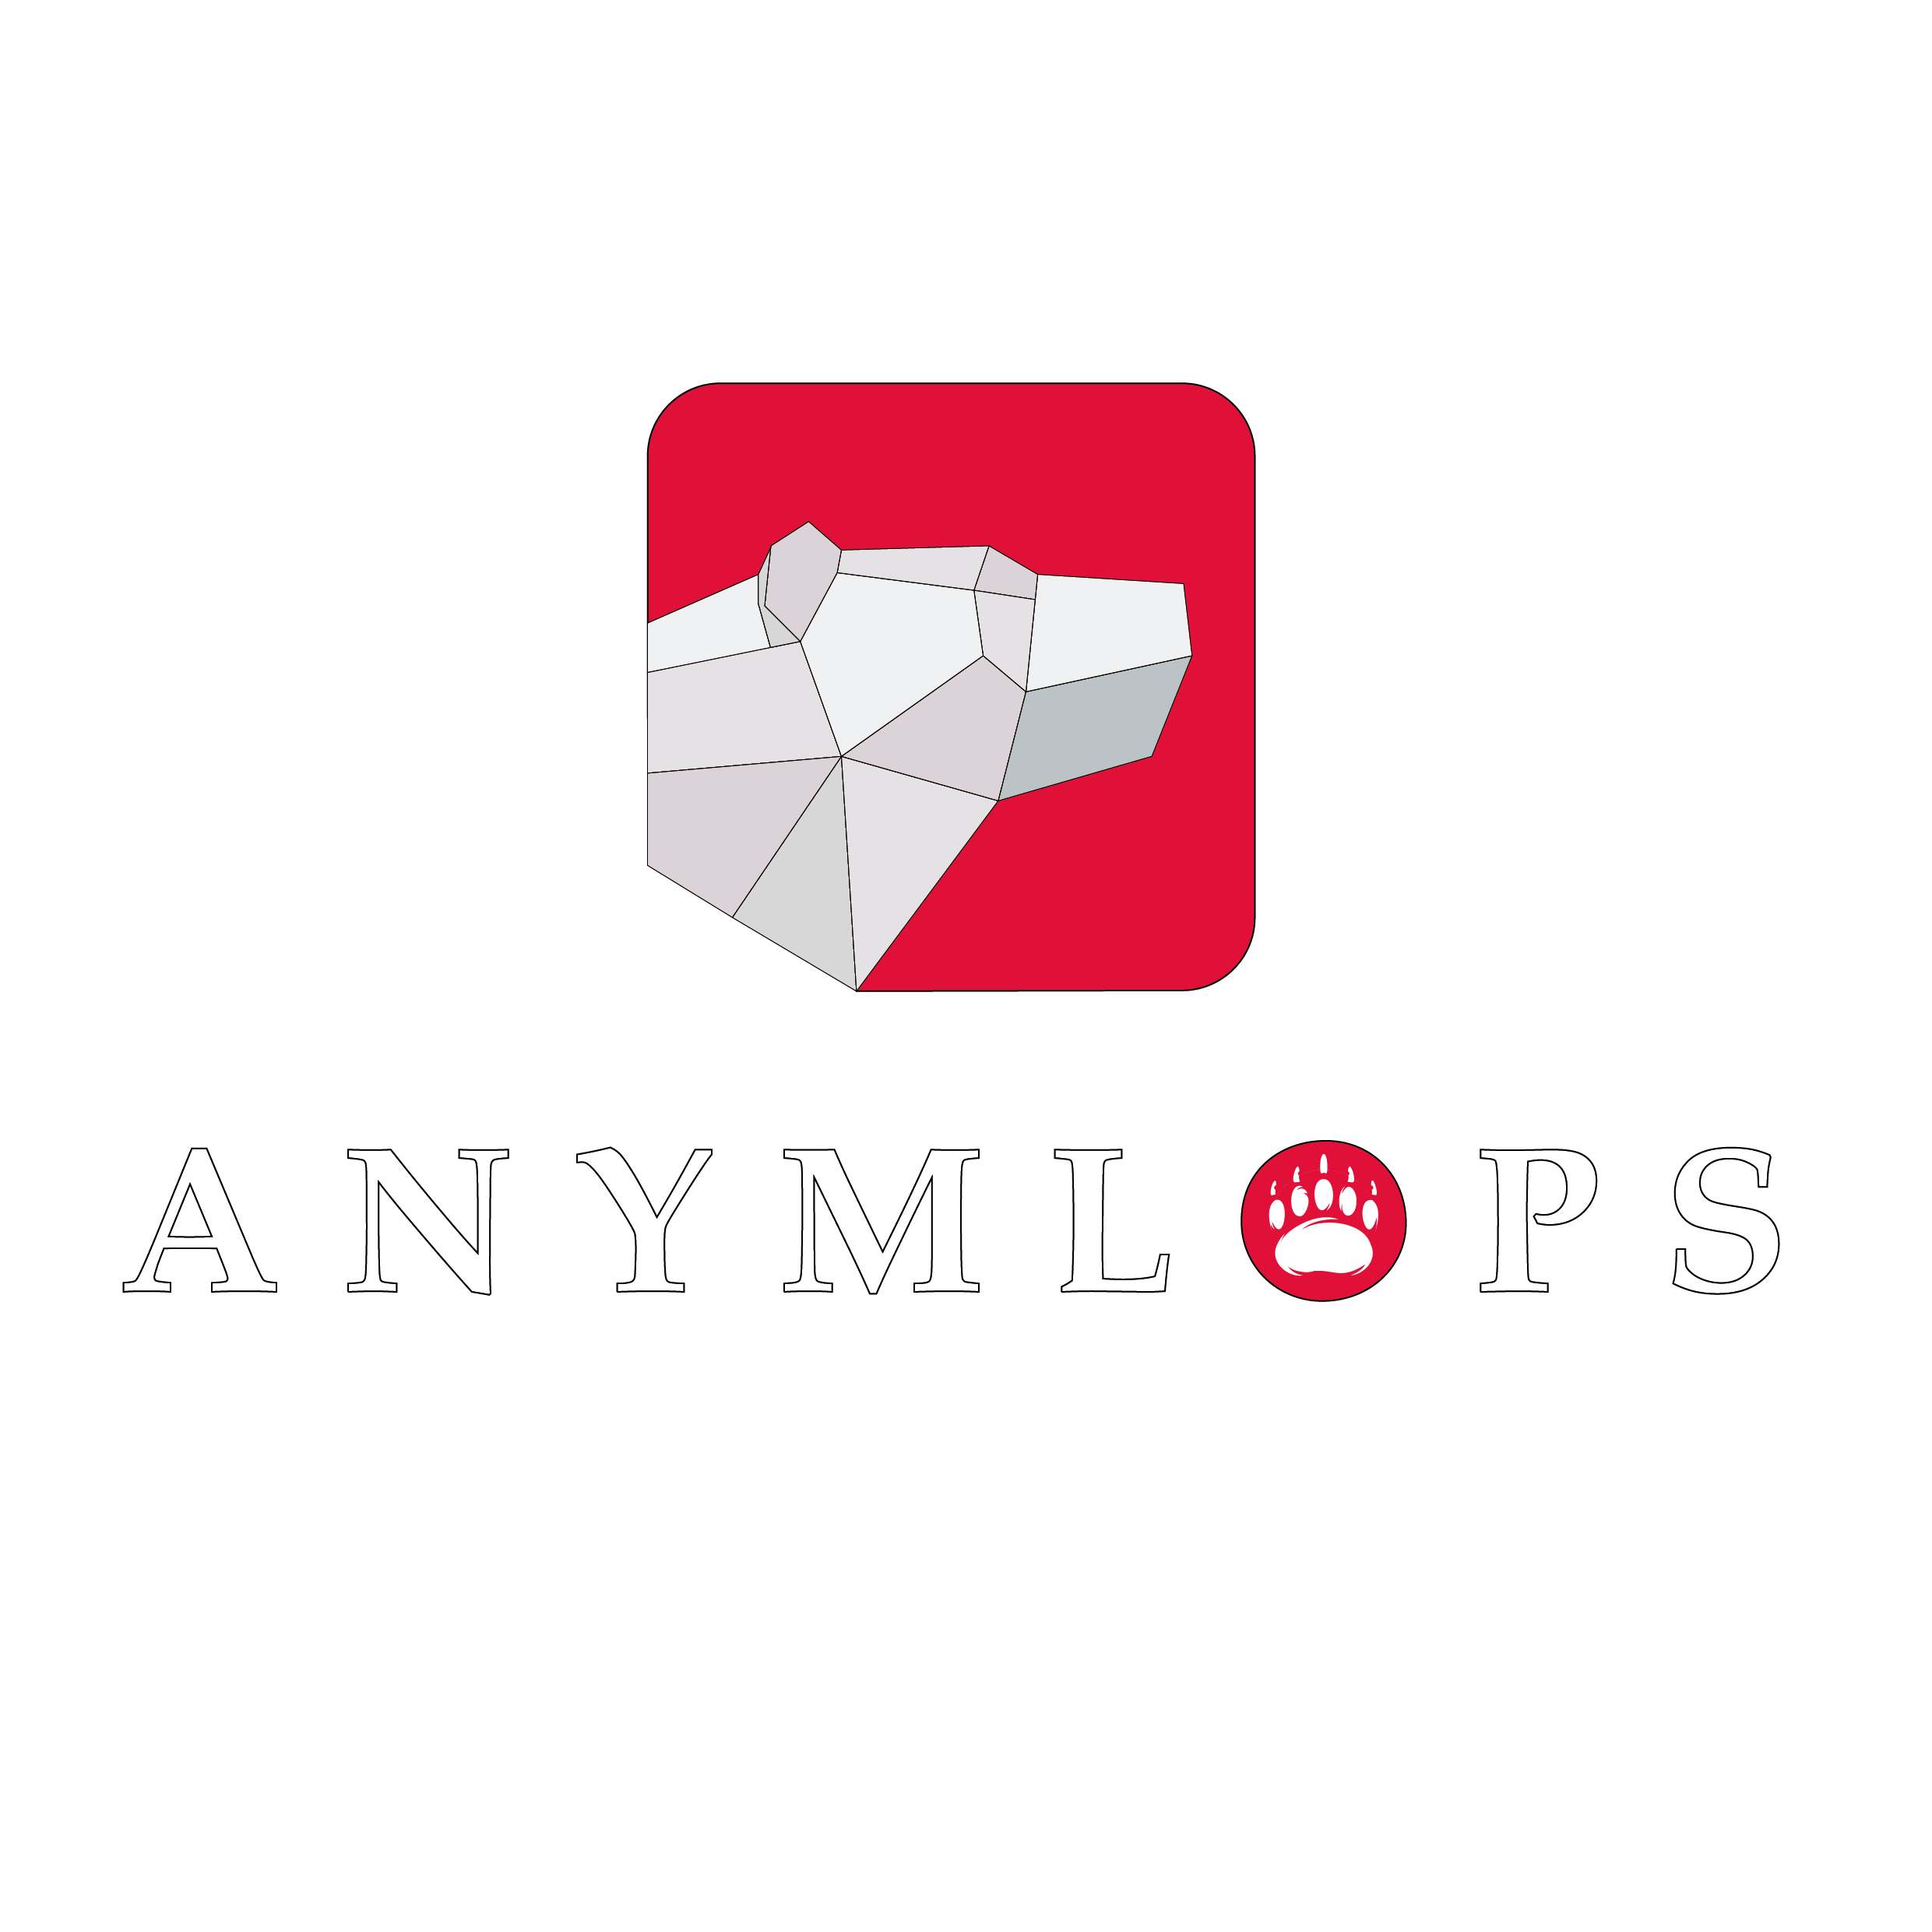 Anymlops logo mark - text will be black in light color mode and white in dark color mode.